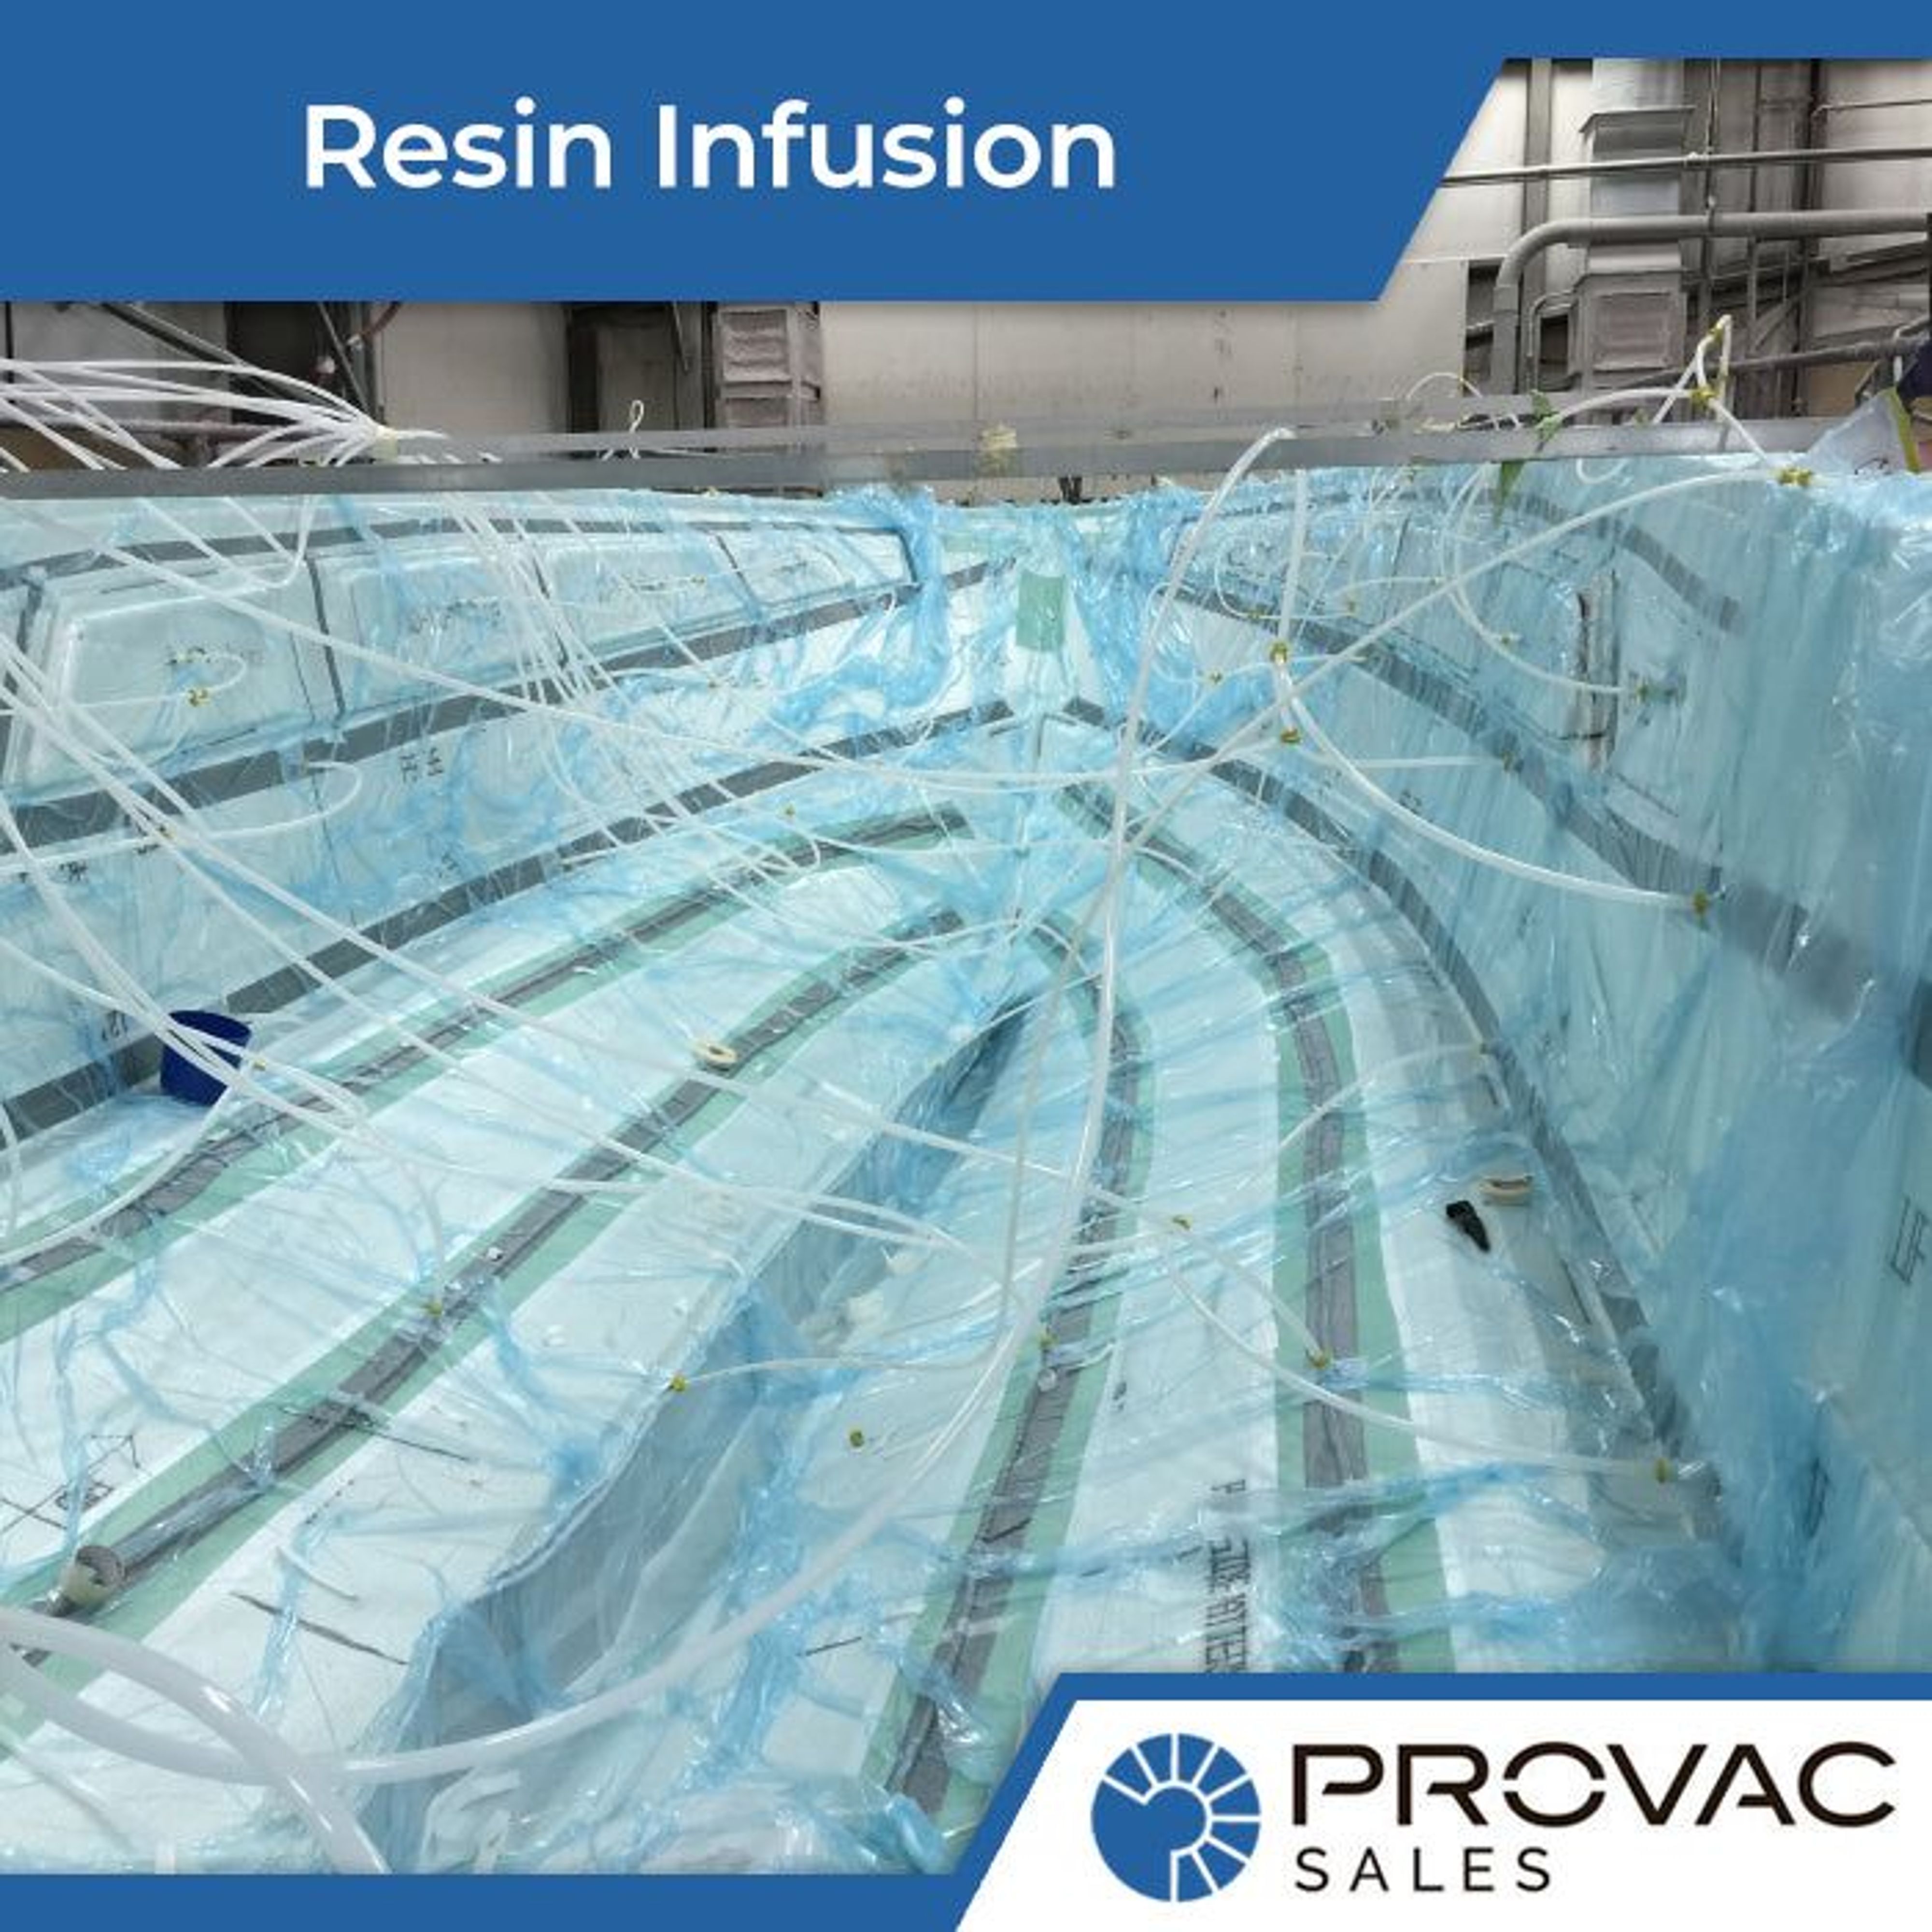 Sizing the right pump for your application- resin infusion Background